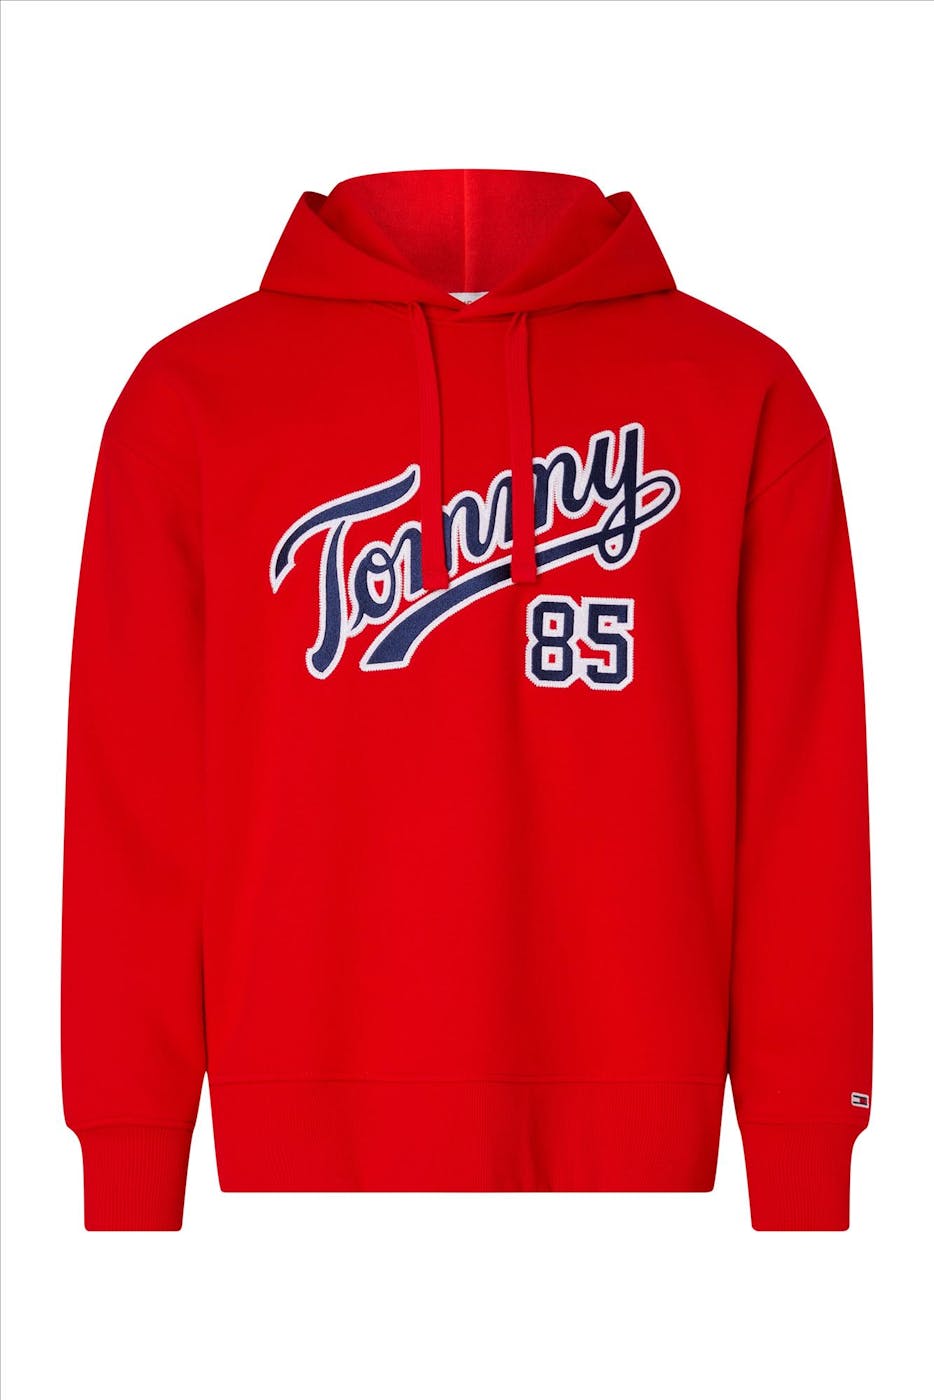 Tommy Jeans - Rode College 85 hoodie